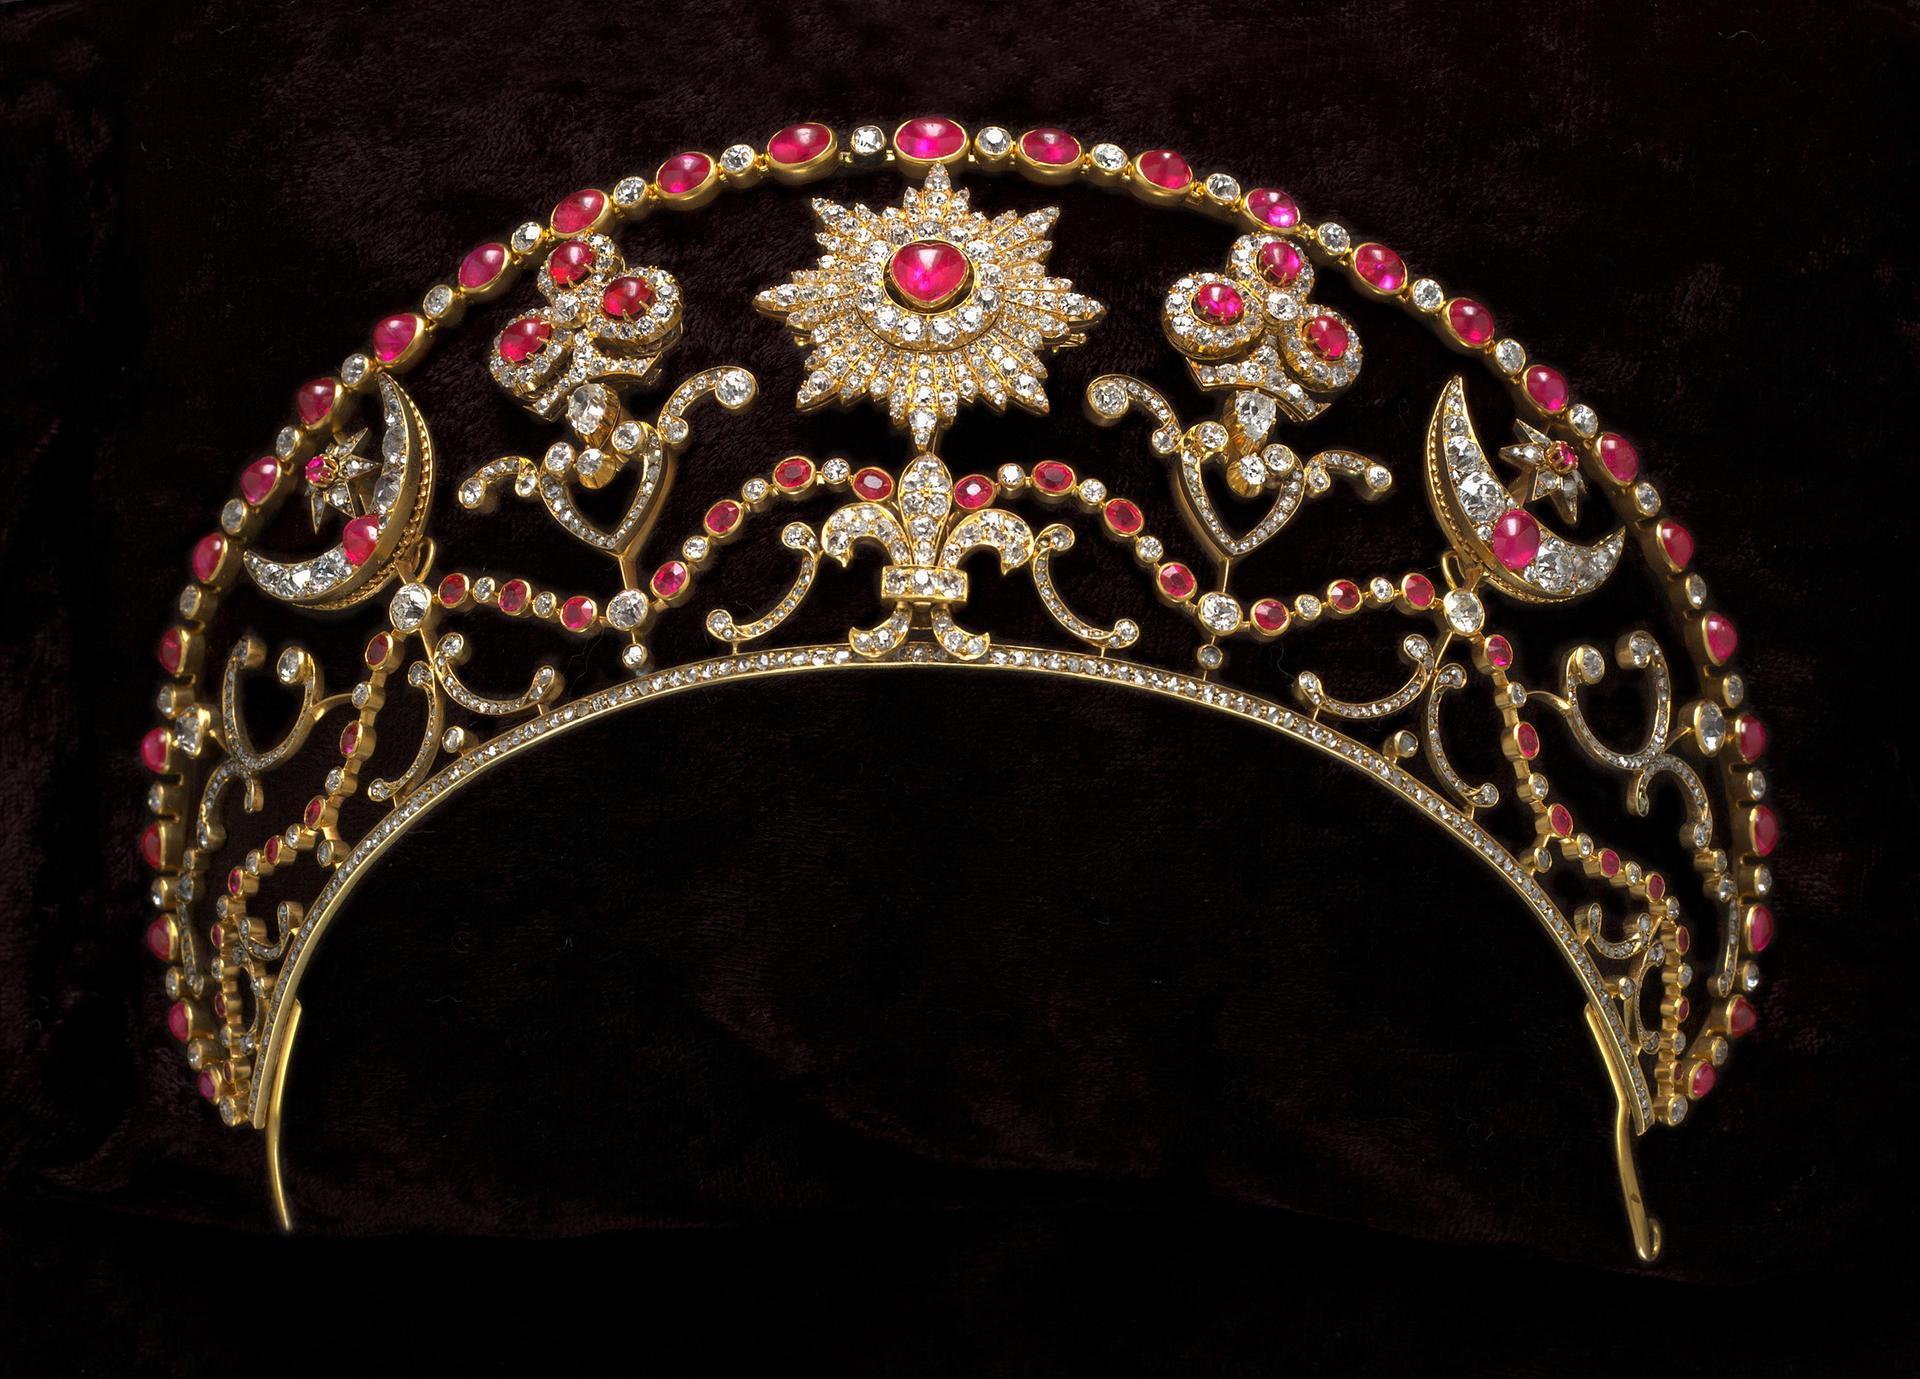 The Creation Process of a Chaumet Tiara 